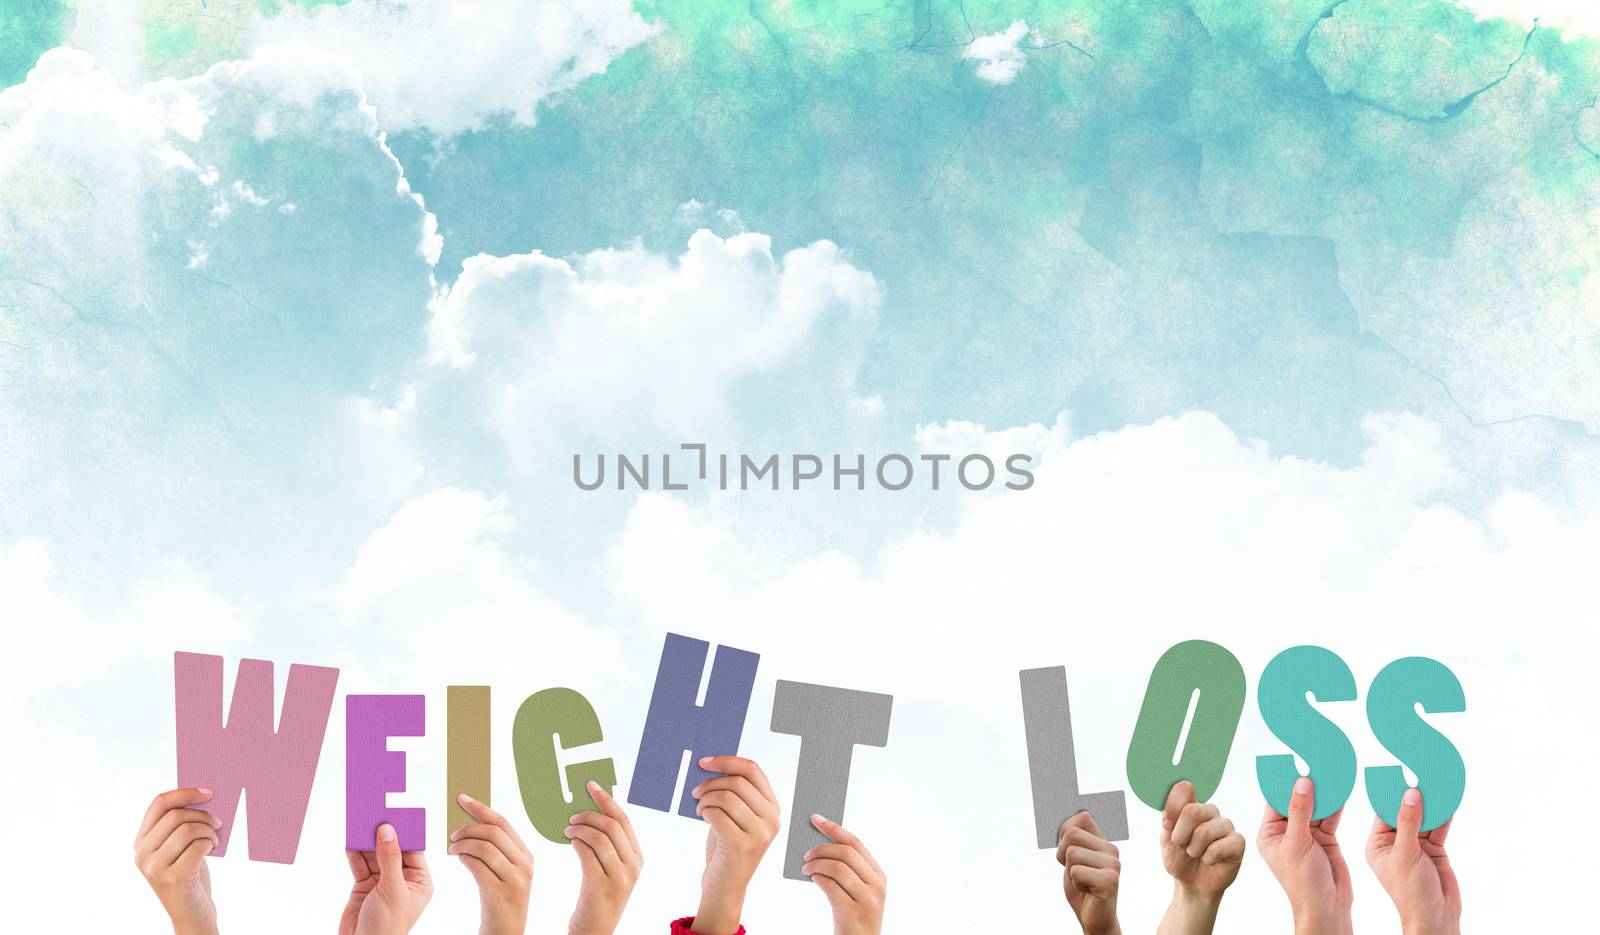 Composite image of hands holding up weight loss by Wavebreakmedia